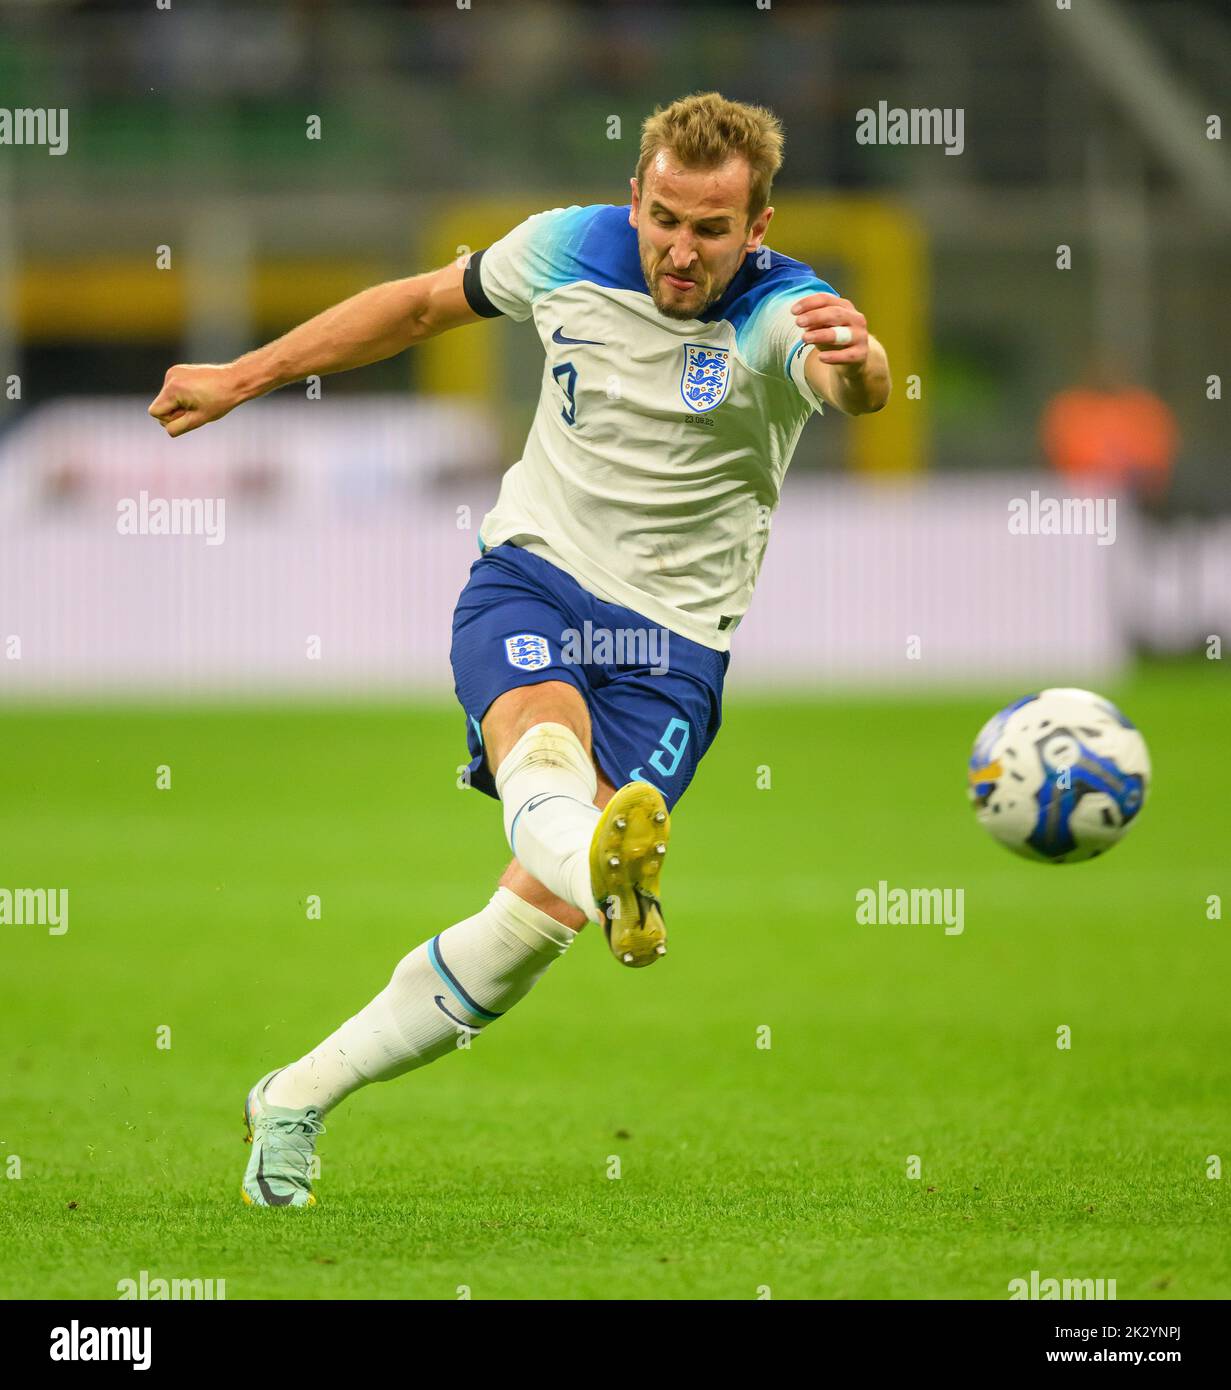 23 Sep 2022 - Italy v England - UEFA Nations League - Group 3 - San Siro  England's Harry Kane gets in a shot on goal during the UEFA Nations League match against Italy. Picture : Mark Pain / Alamy Live News Stock Photo